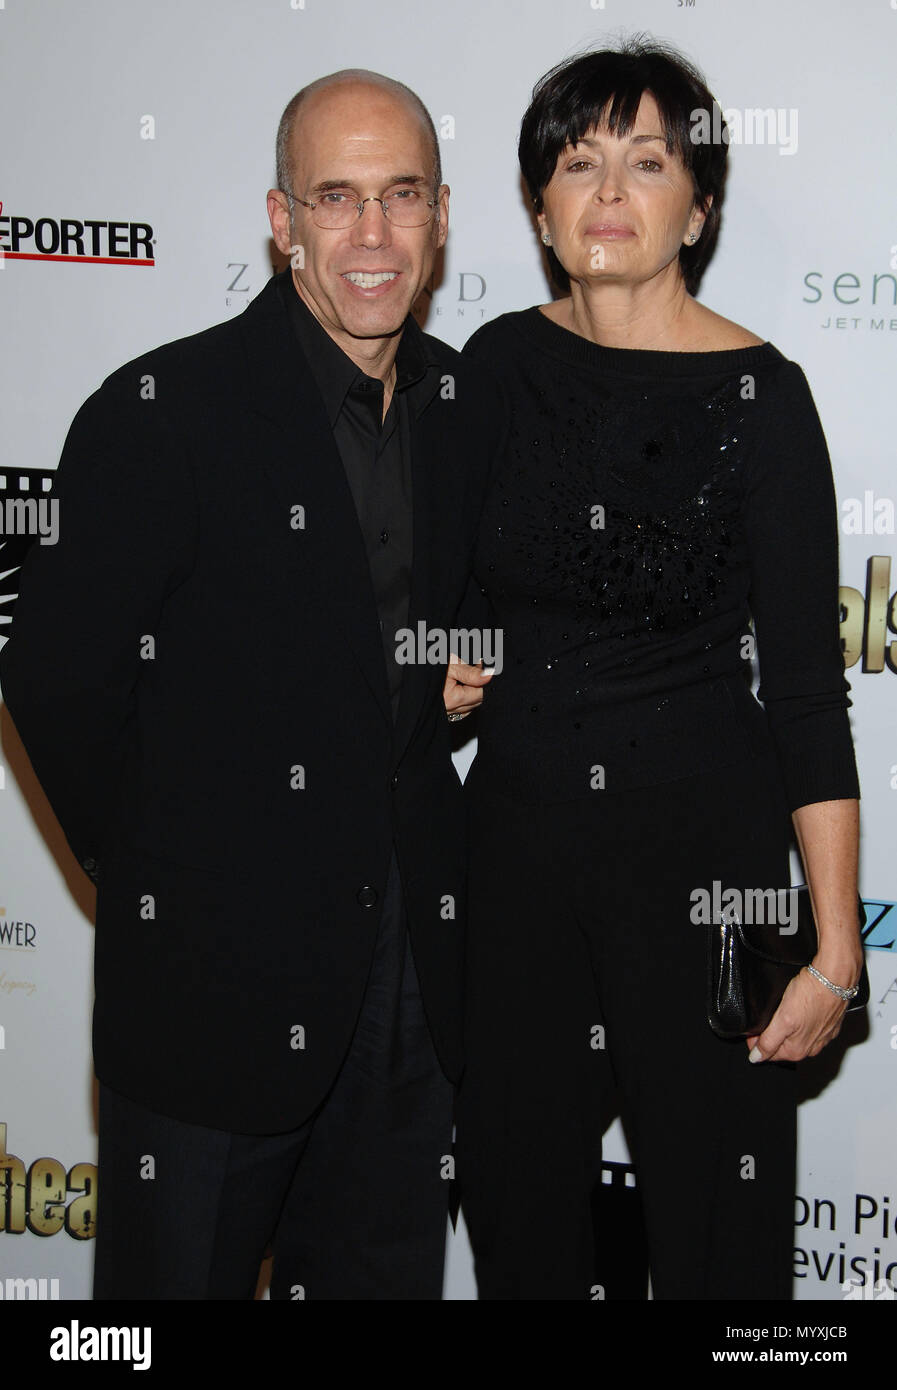 Jeffrey Katzenberg and wife arriving at A Fine Romance to Benefit The Motion Pictures & Television Fund at the Gower Sunset Studio in Los Angeles.  3/4 smile eye contact KatzenbergJeffrey wife080  Event in Hollywood Life - California, Red Carpet Event, USA, Film Industry, Celebrities, Photography, Bestof, Arts Culture and Entertainment, Celebrities fashion, Best of, Hollywood Life, Event in Hollywood Life - California, Red Carpet and backstage, Music celebrities, Topix, Couple, family ( husband and wife ) and kids- Children, brothers and sisters inquiry tsuni@Gamma-USA.com, Credit Tsuni / USA, Stock Photo